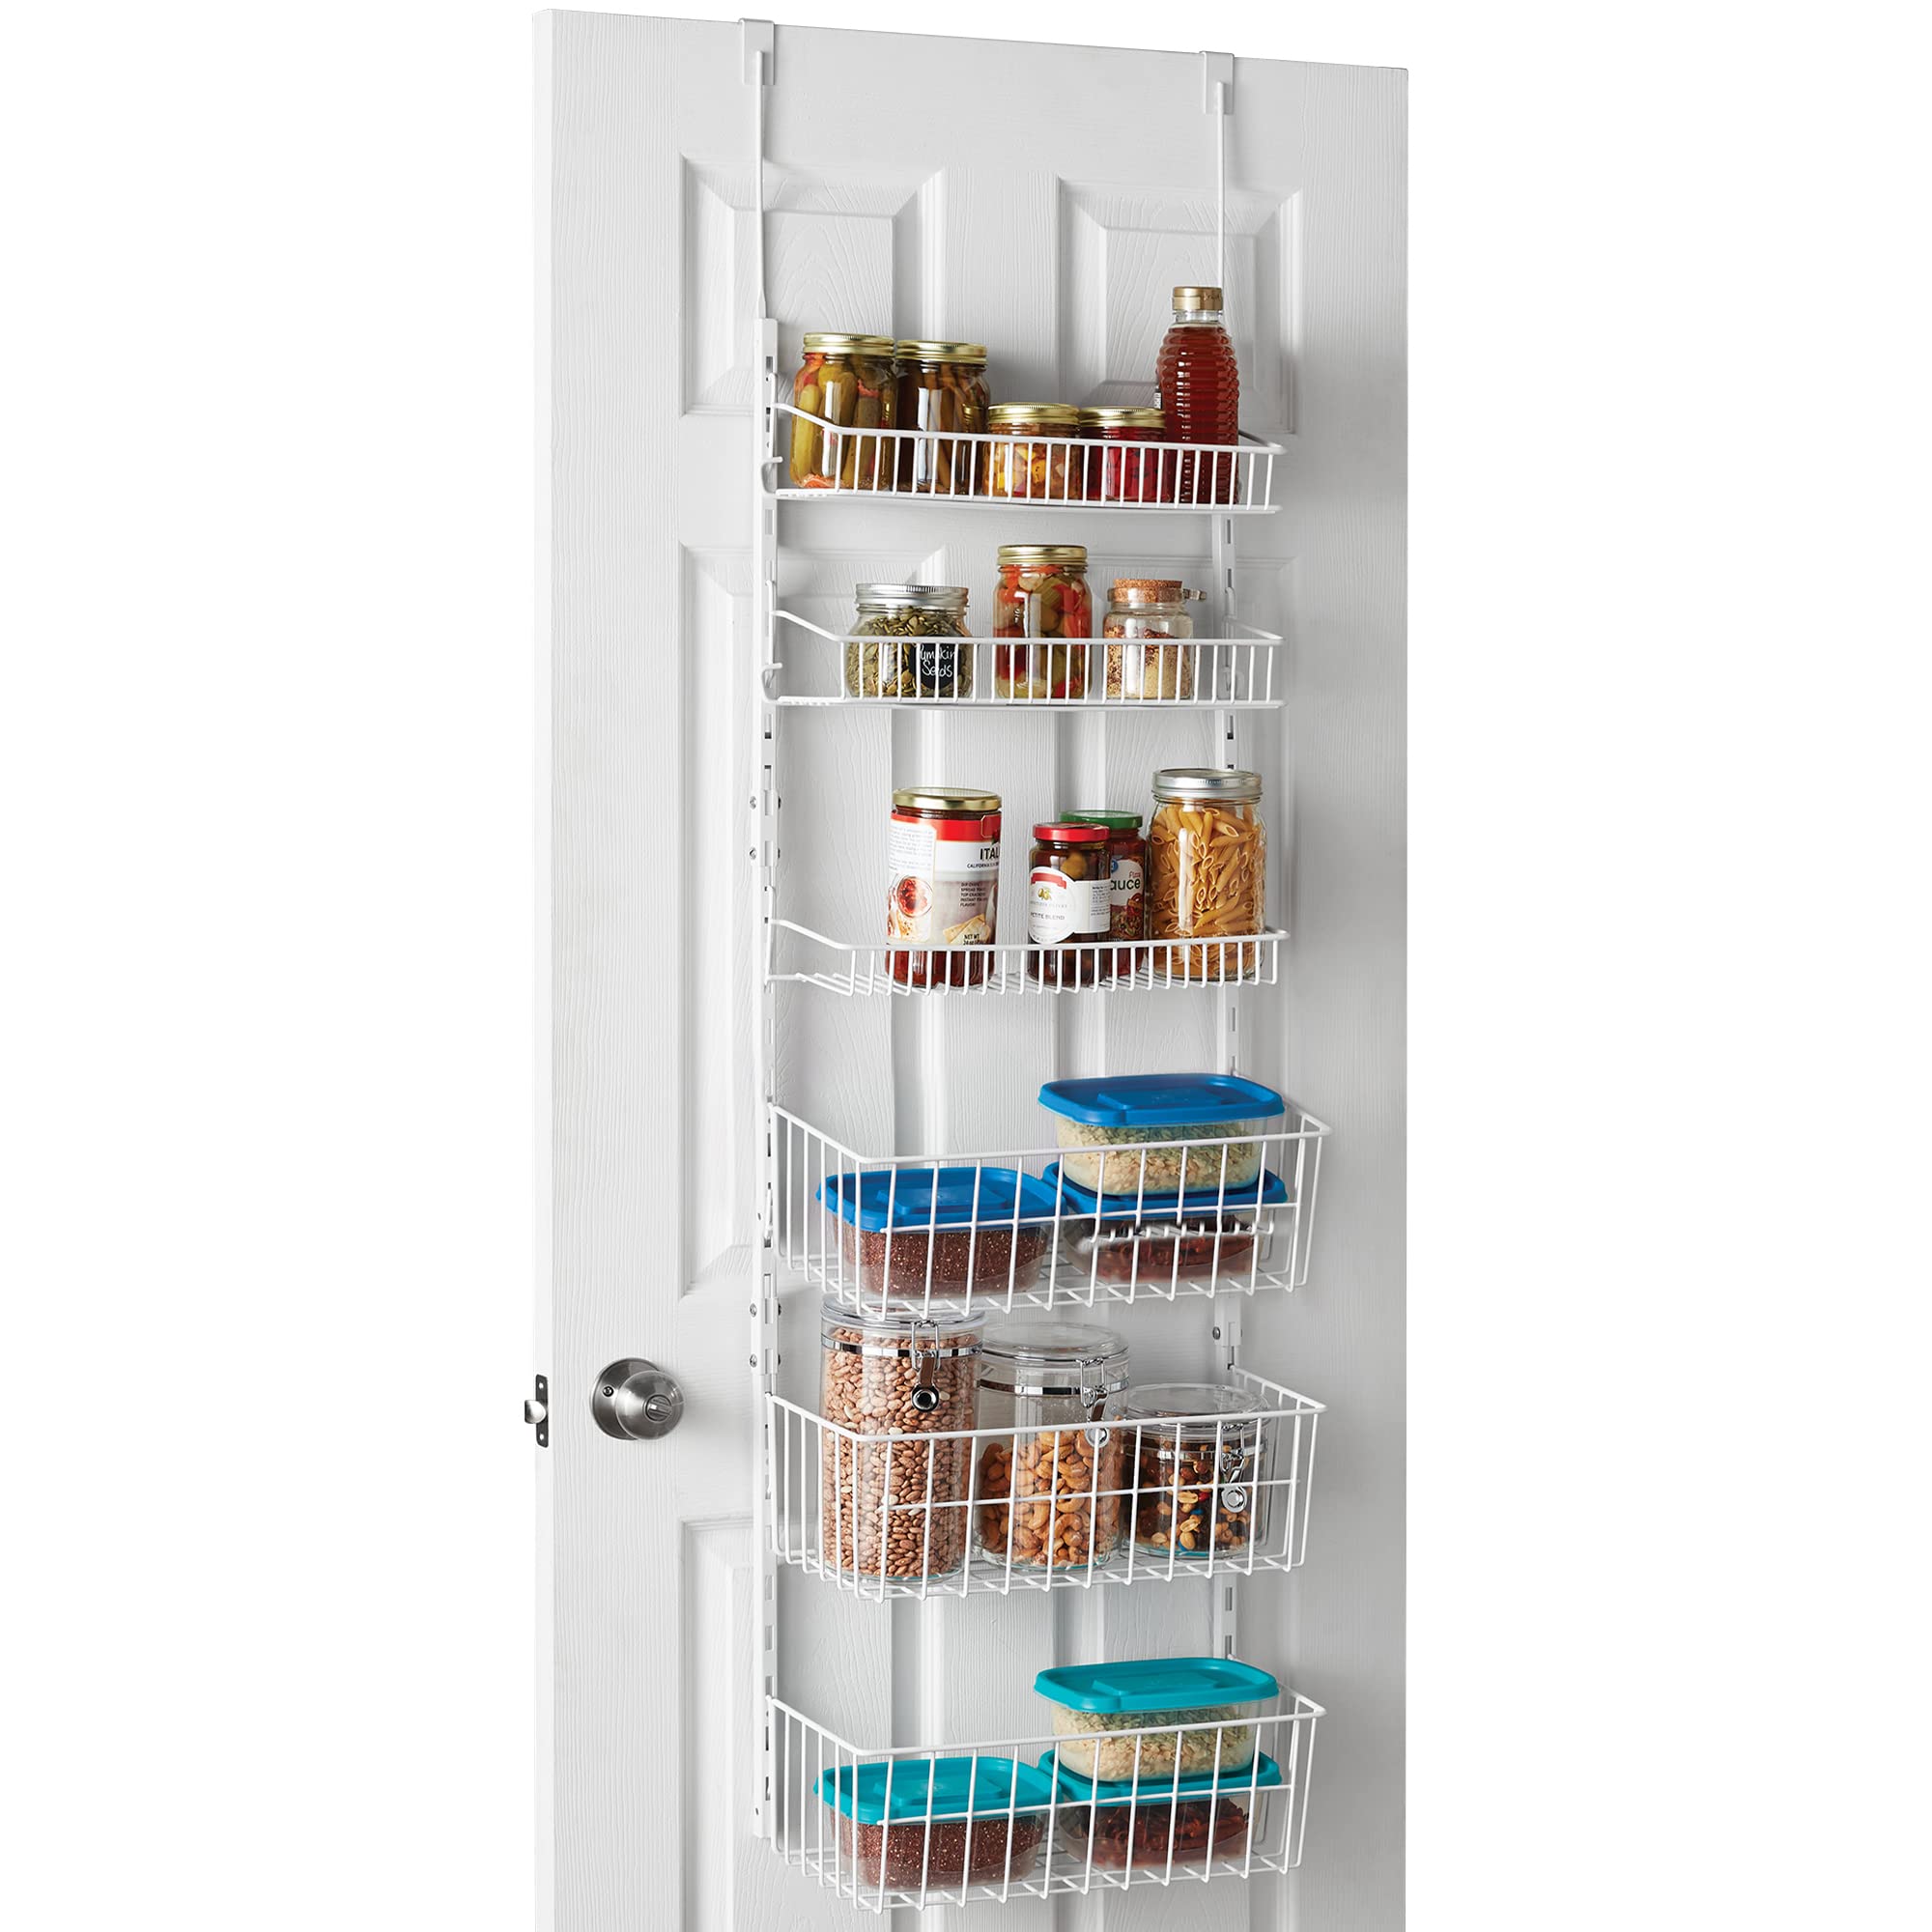 Smart Design Over The Door Pantry Organizer Rack with 6 Adjustable Shelves - Steel Metal Wire Baskets and Frame - Hanging - Wall Mountable - Cans, ...